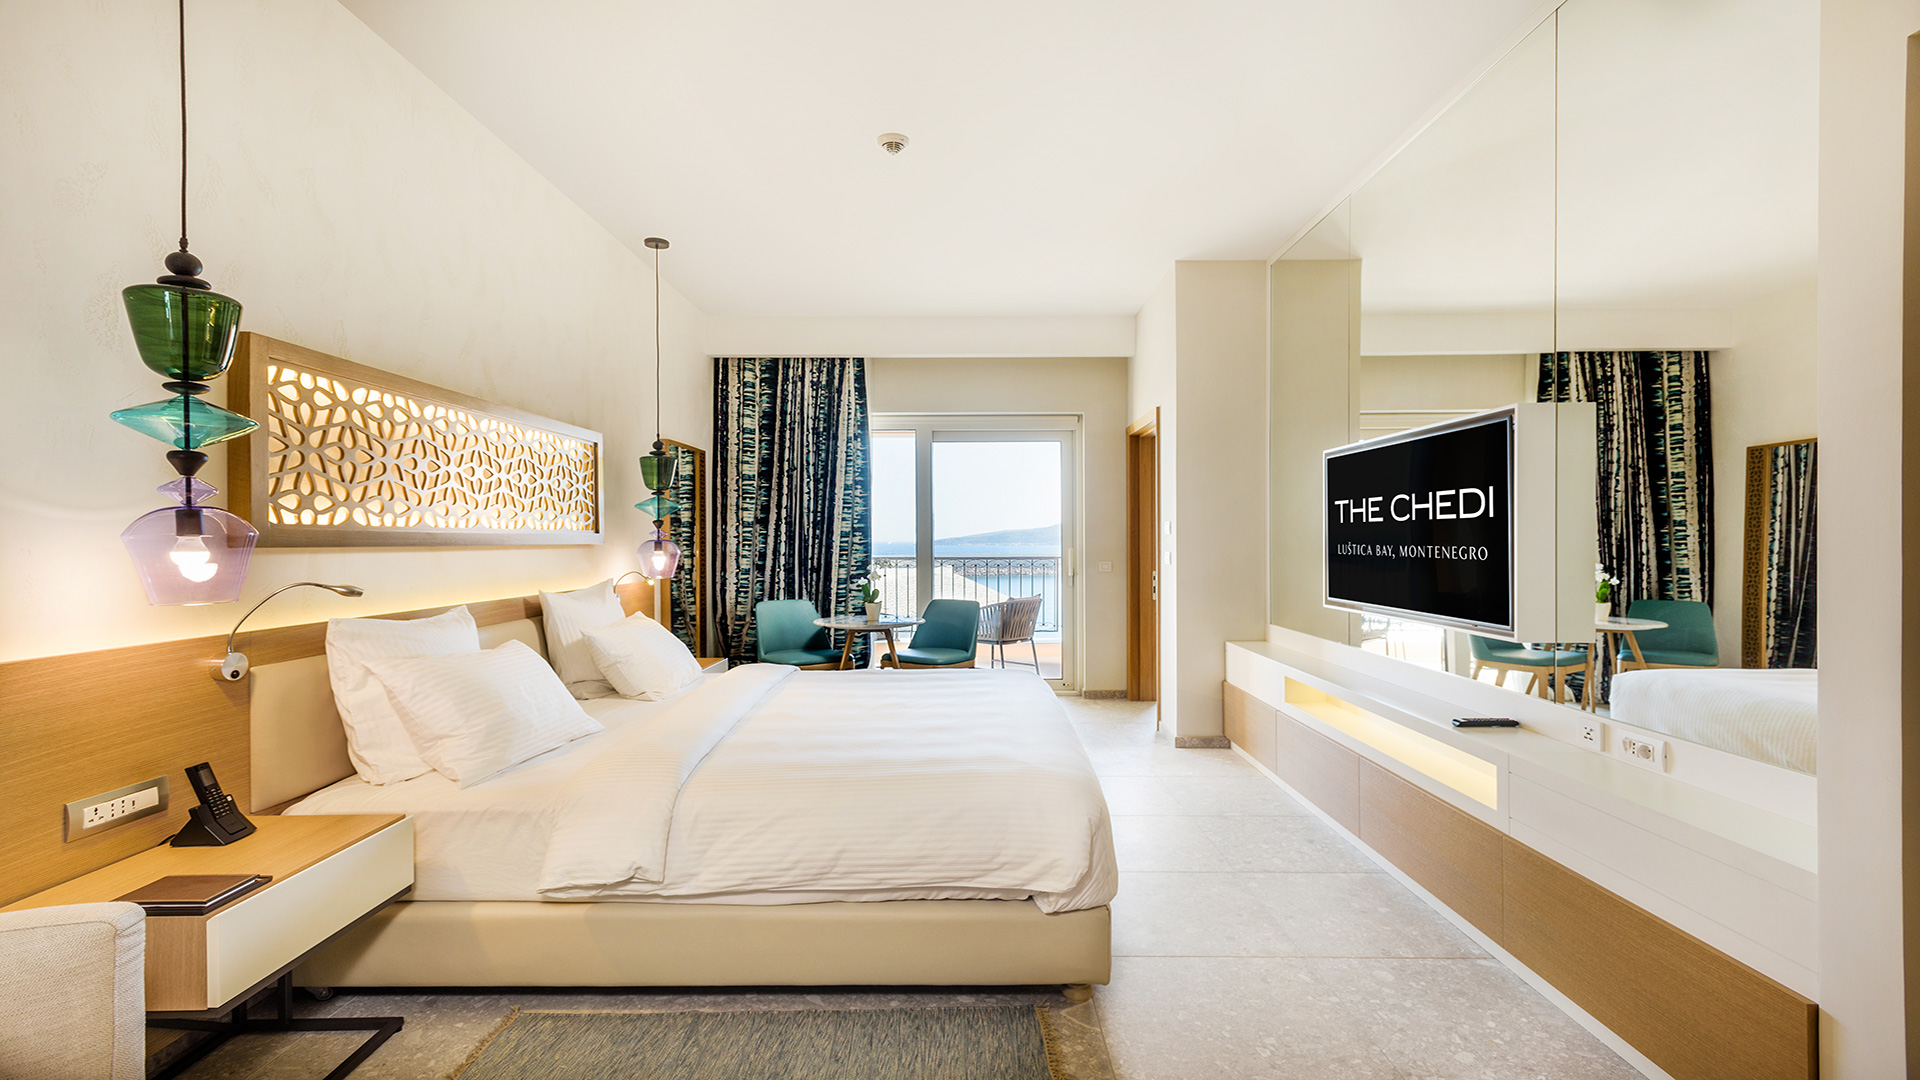 The Chedi Residences for Sale Bedroom